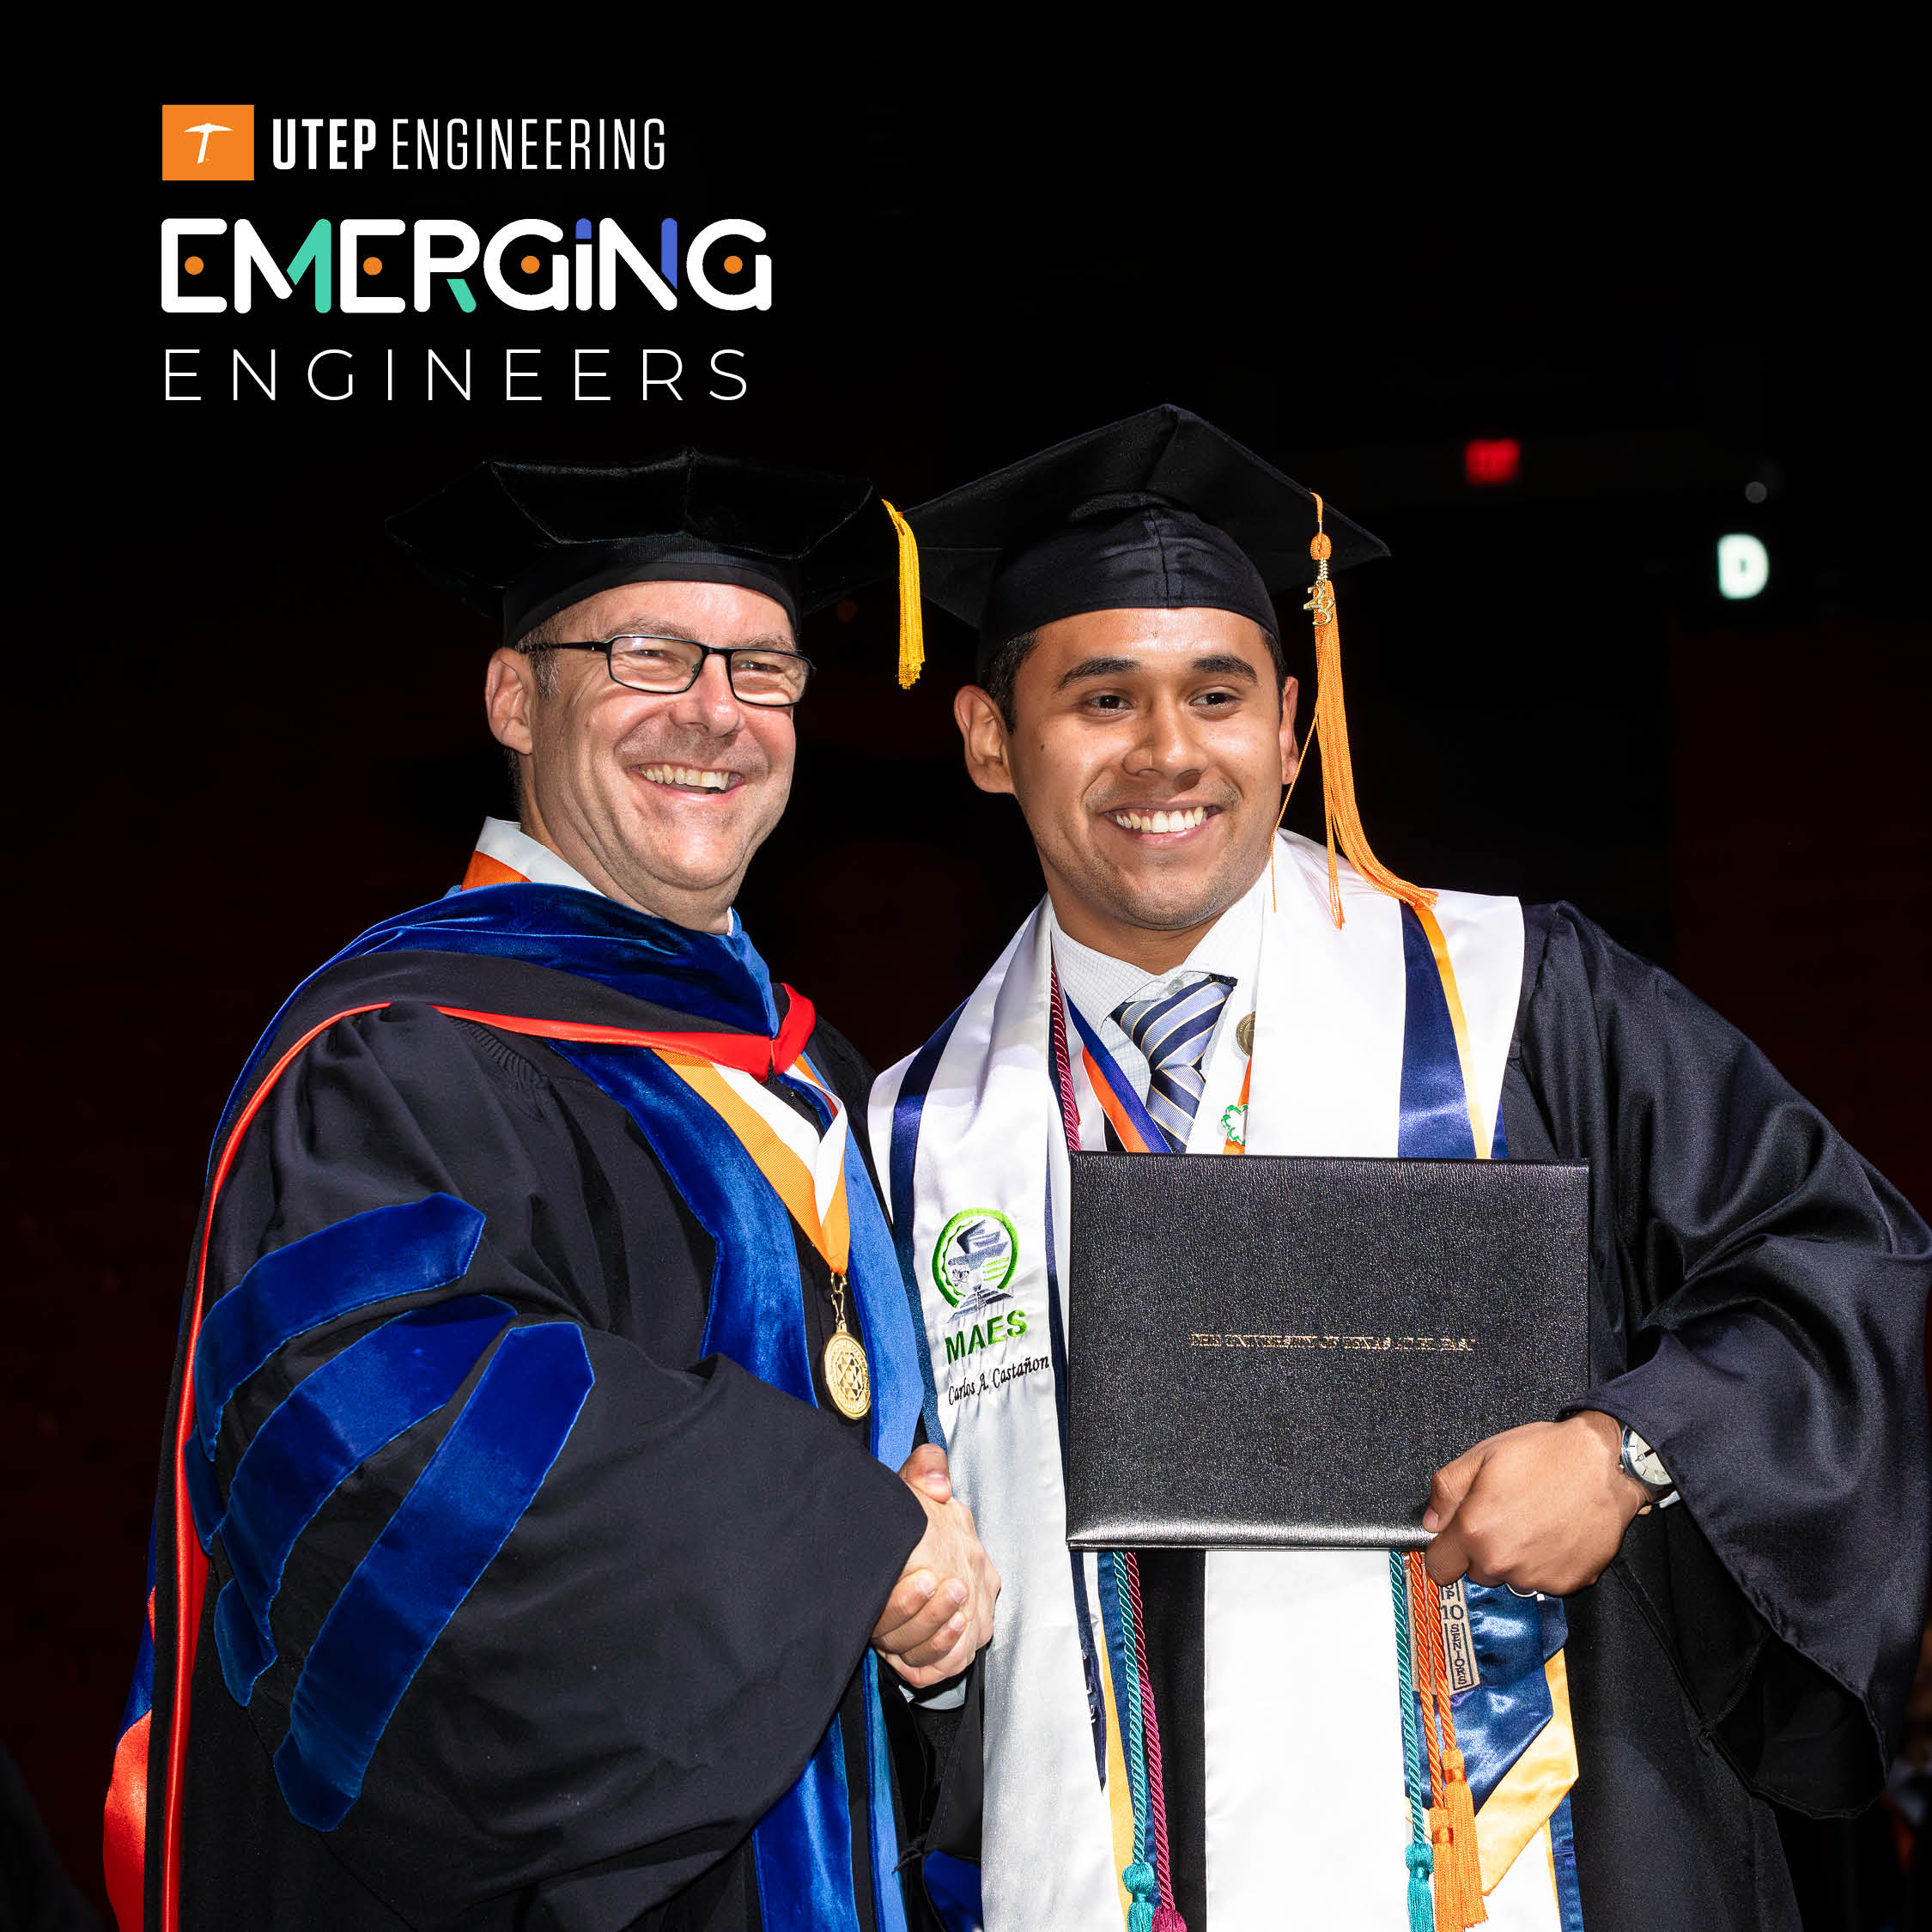 The Remarkable Journey of Carlos Castañon, Top-Ranked UTEP Mechanical Engineering Graduate